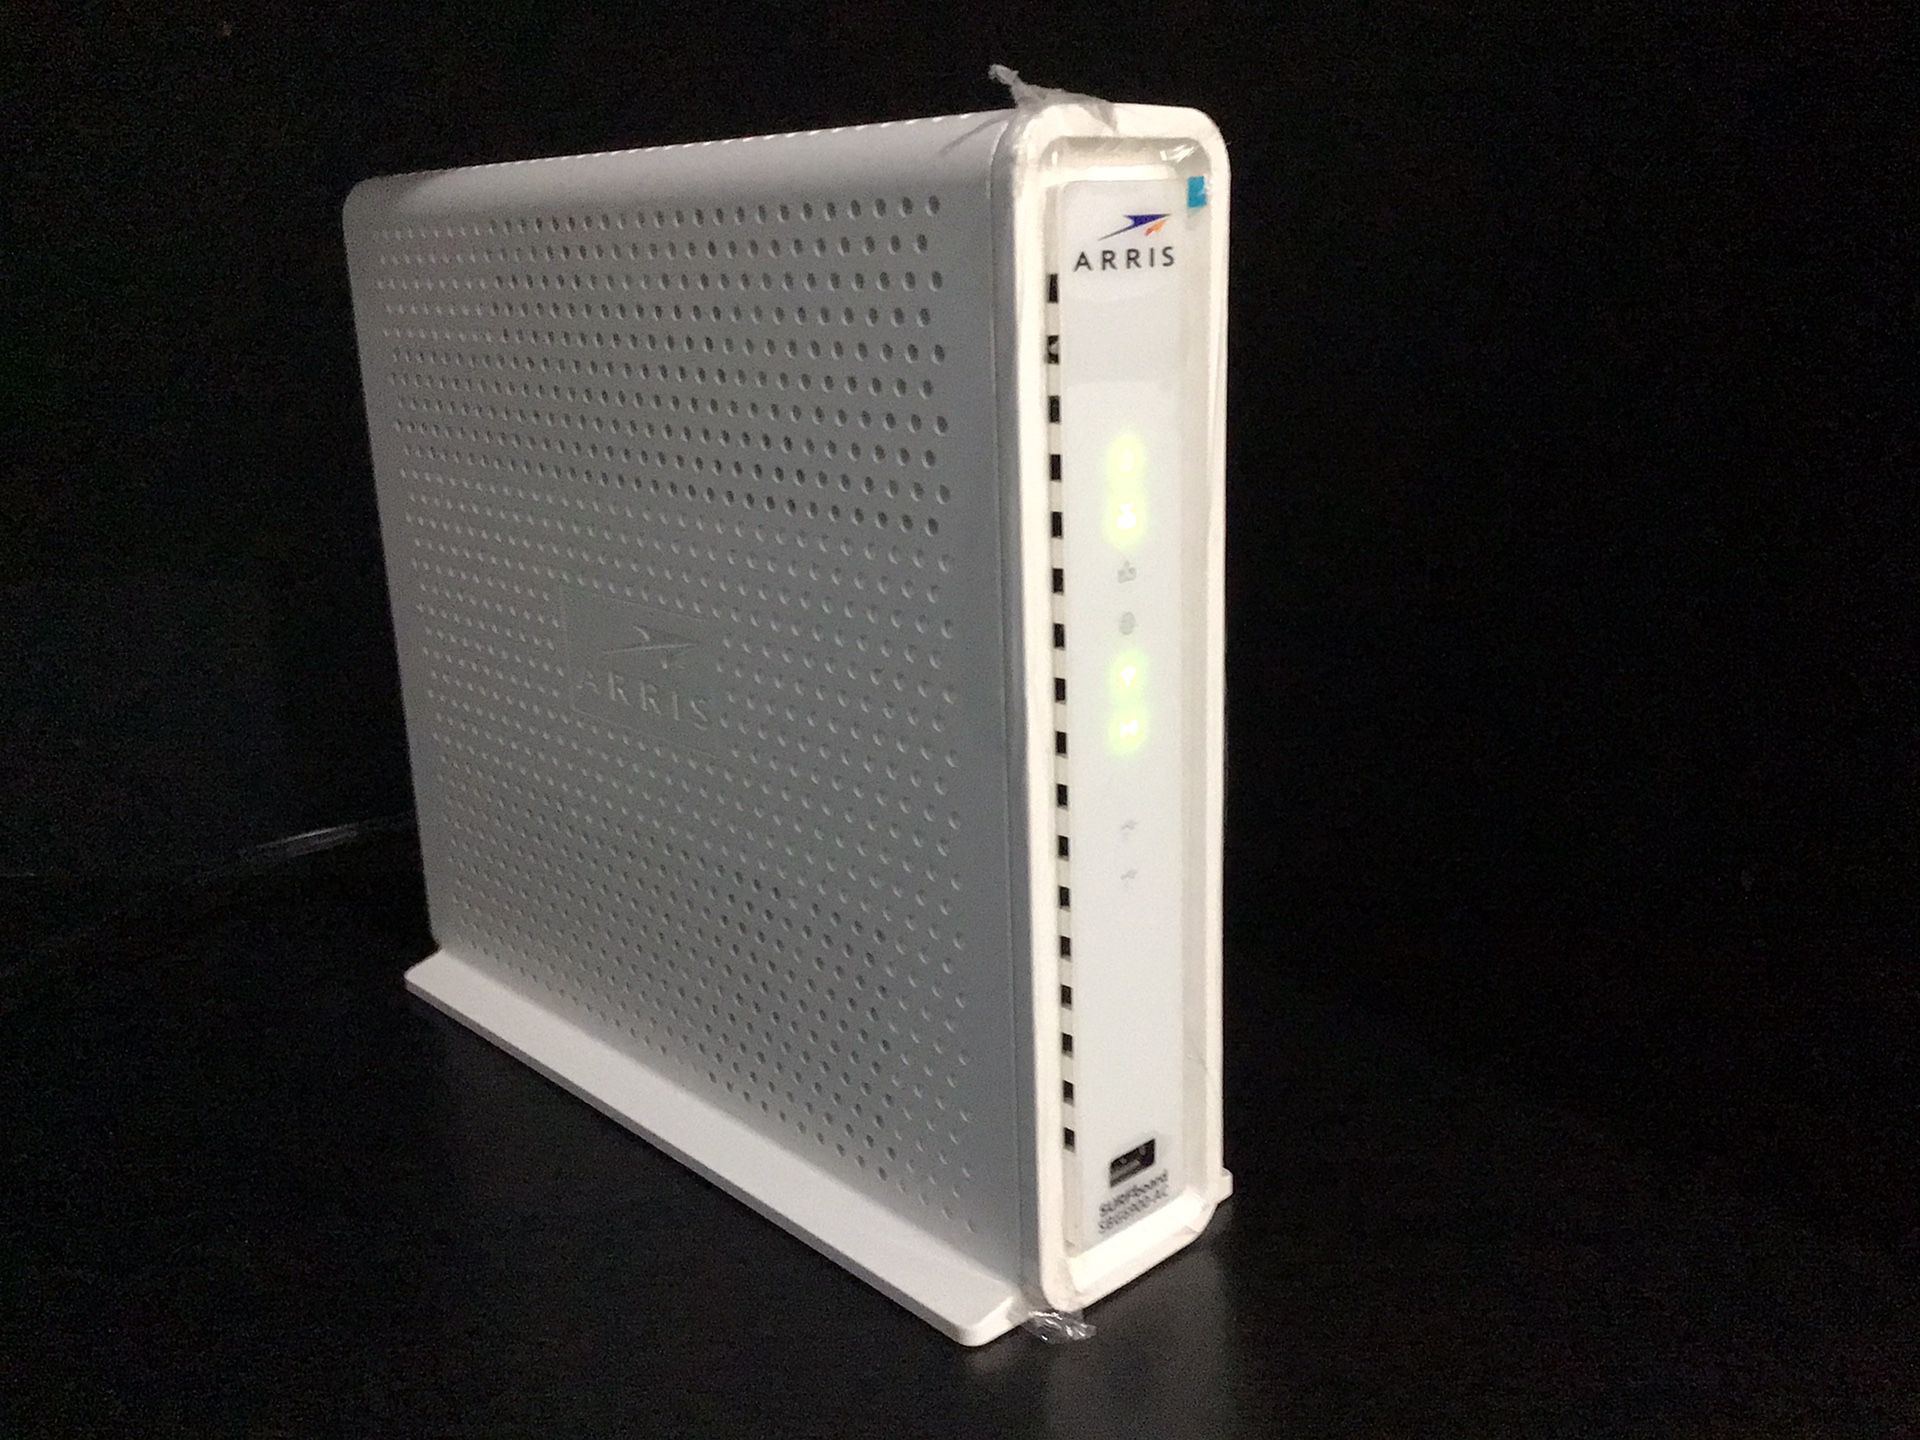 SBG6900 SURFboard DOCSIS 3.0 Cable Modem & Wi-Fi Router